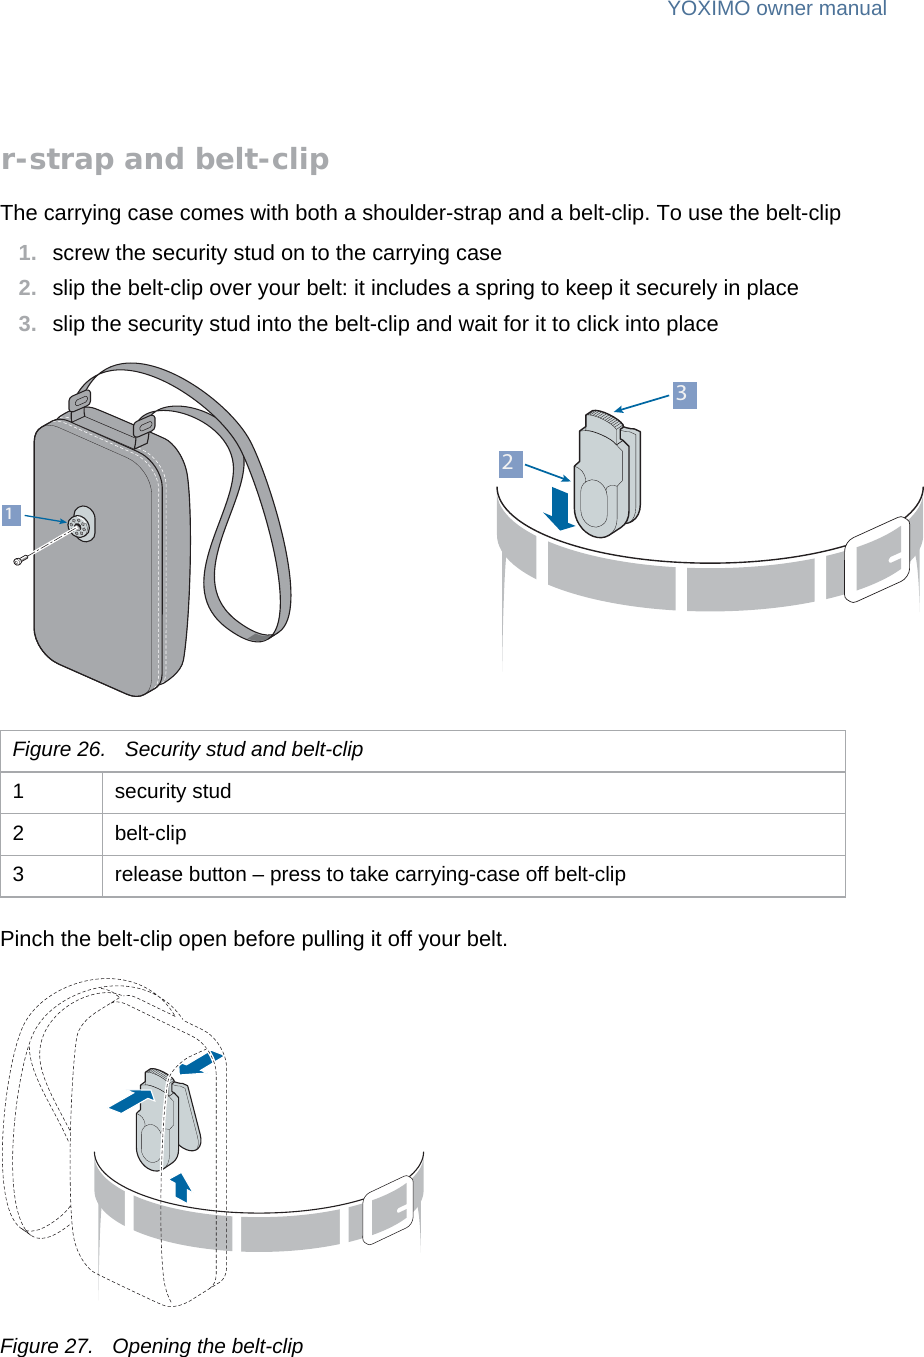 YOXIMO owner manual26  publiclast updated 30/9/15 document release 1.1 om_yxm_accessories.fmShoulder-strap and belt-clipThe carrying case comes with both a shoulder-strap and a belt-clip. To use the belt-clip1. screw the security stud on to the carrying case2. slip the belt-clip over your belt: it includes a spring to keep it securely in place3. slip the security stud into the belt-clip and wait for it to click into placePinch the belt-clip open before pulling it off your belt.Figure 27. Opening the belt-clipFigure 26. Security stud and belt-clip1 security stud2 belt-clip3 release button – press to take carrying-case off belt-clip231